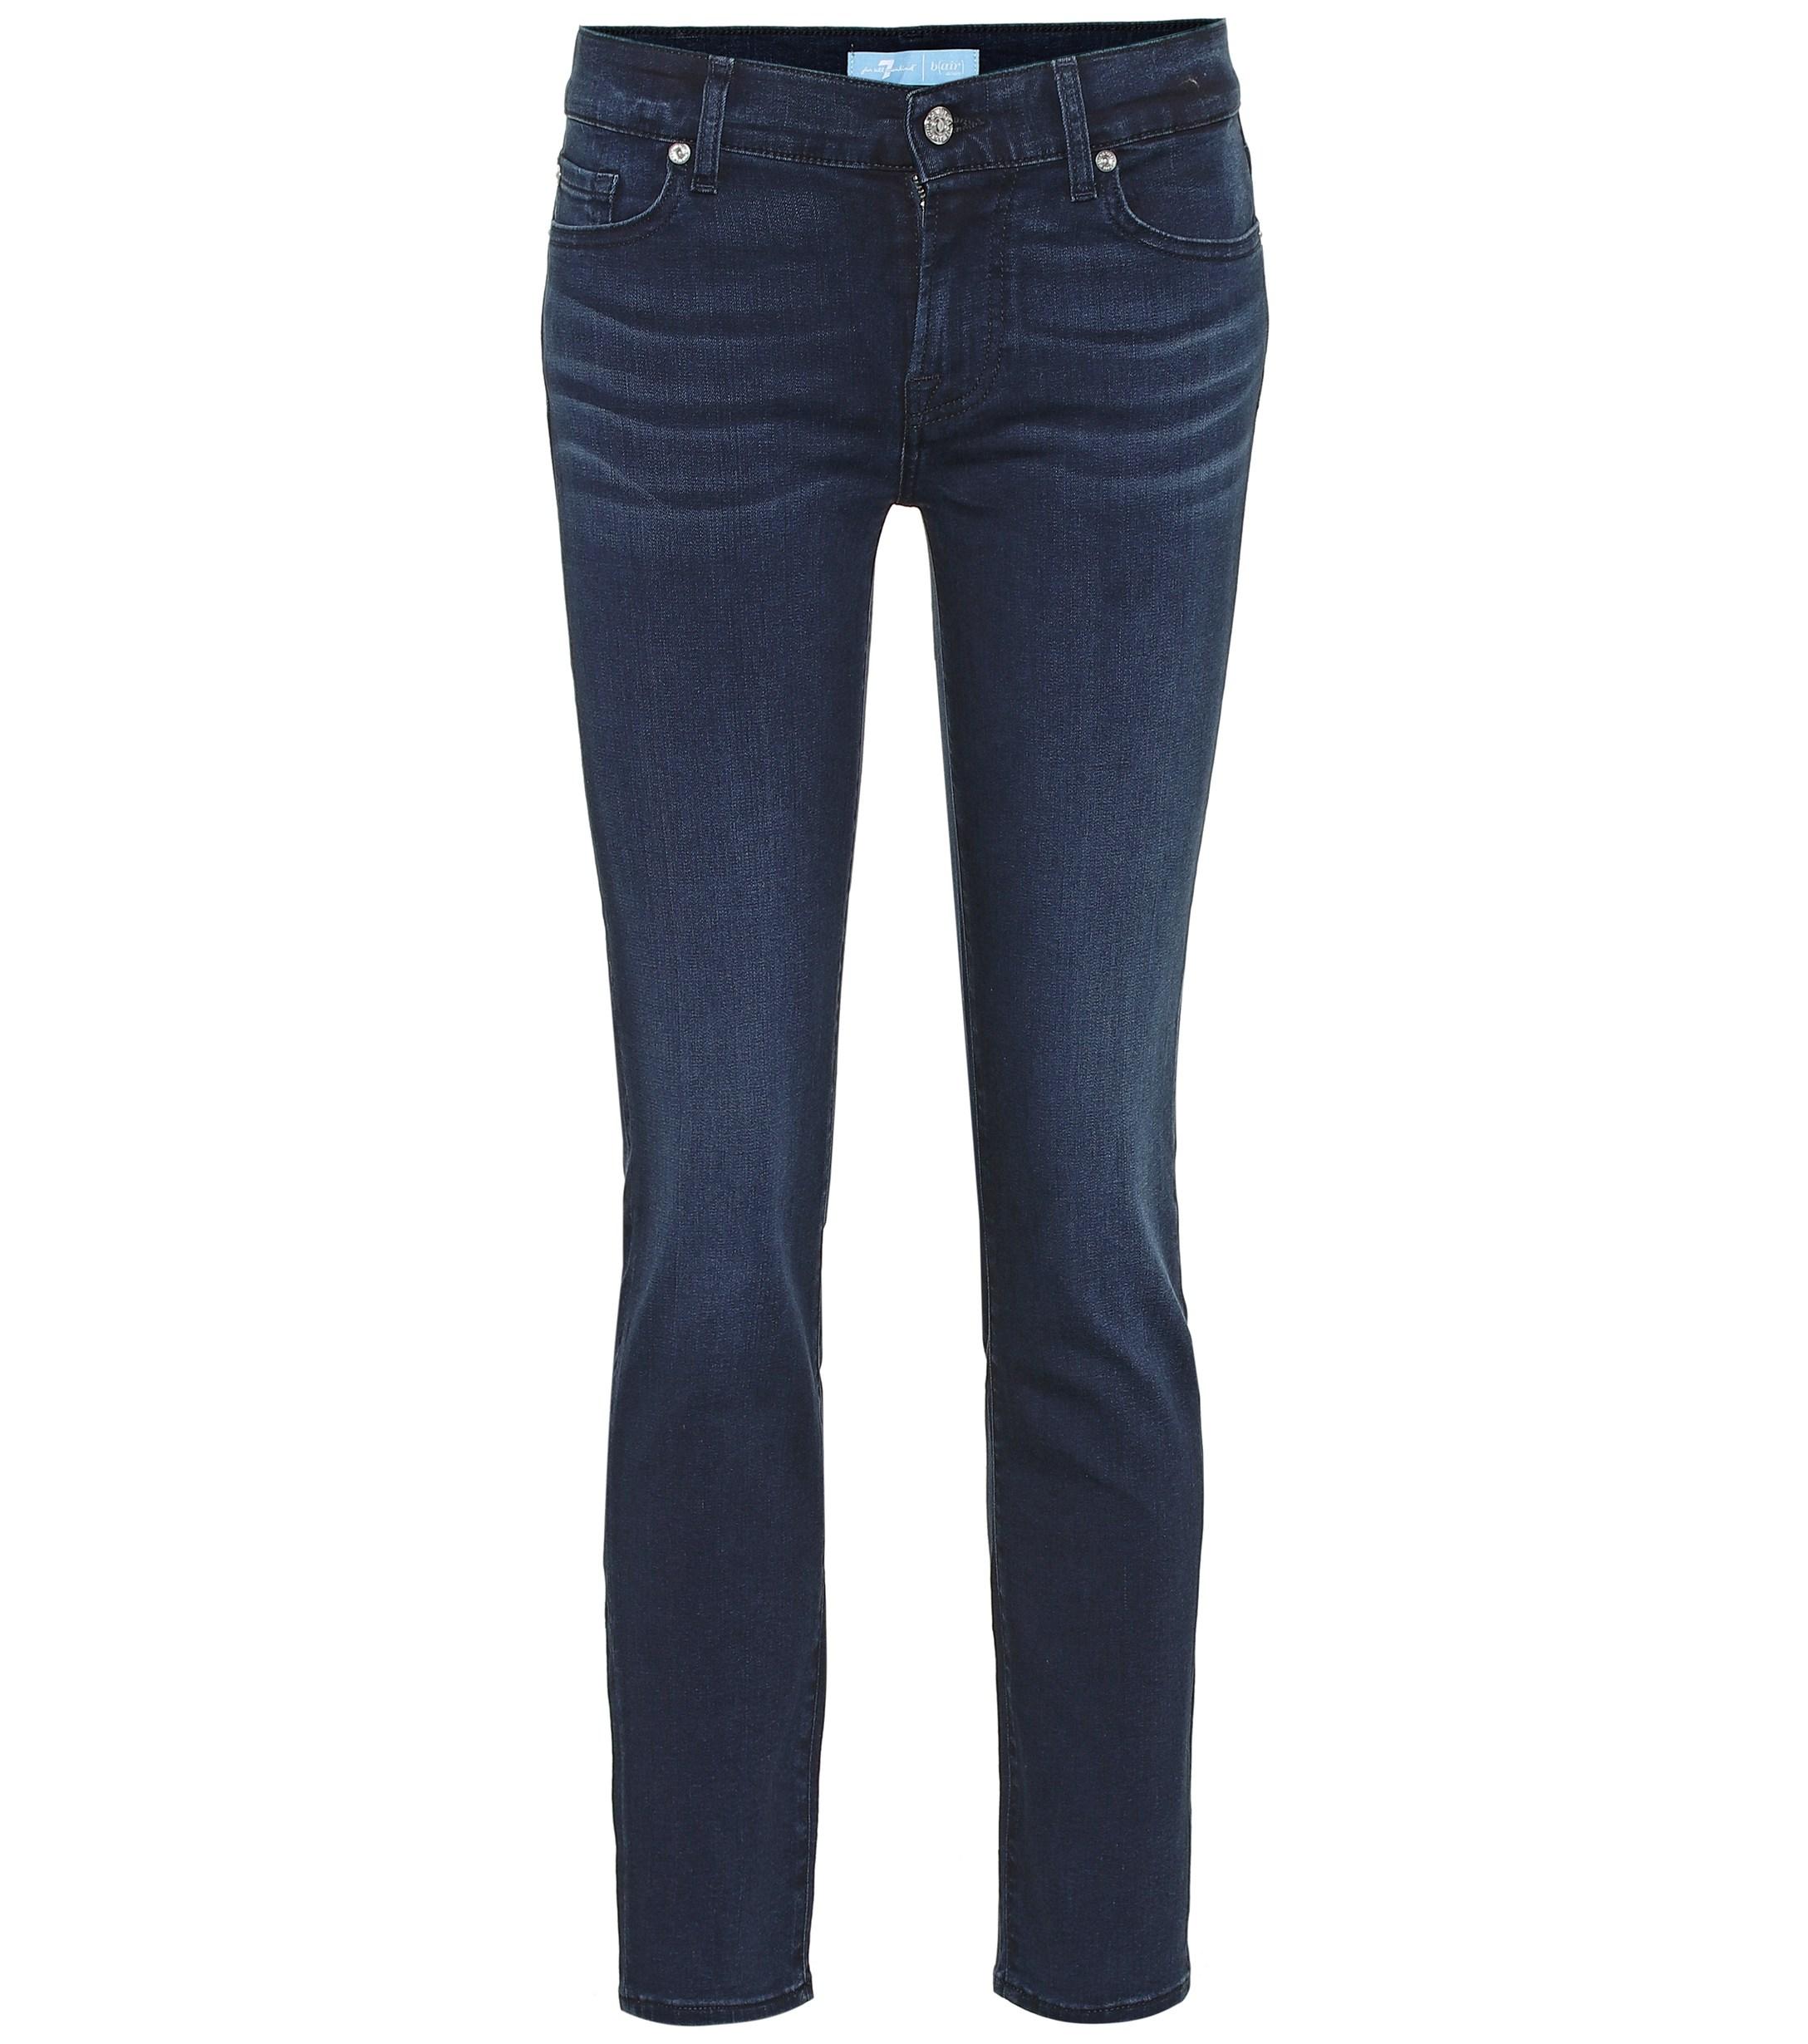 7 For All Mankind Roxanne Mid-rise Skinny Jeans in Blue - Lyst